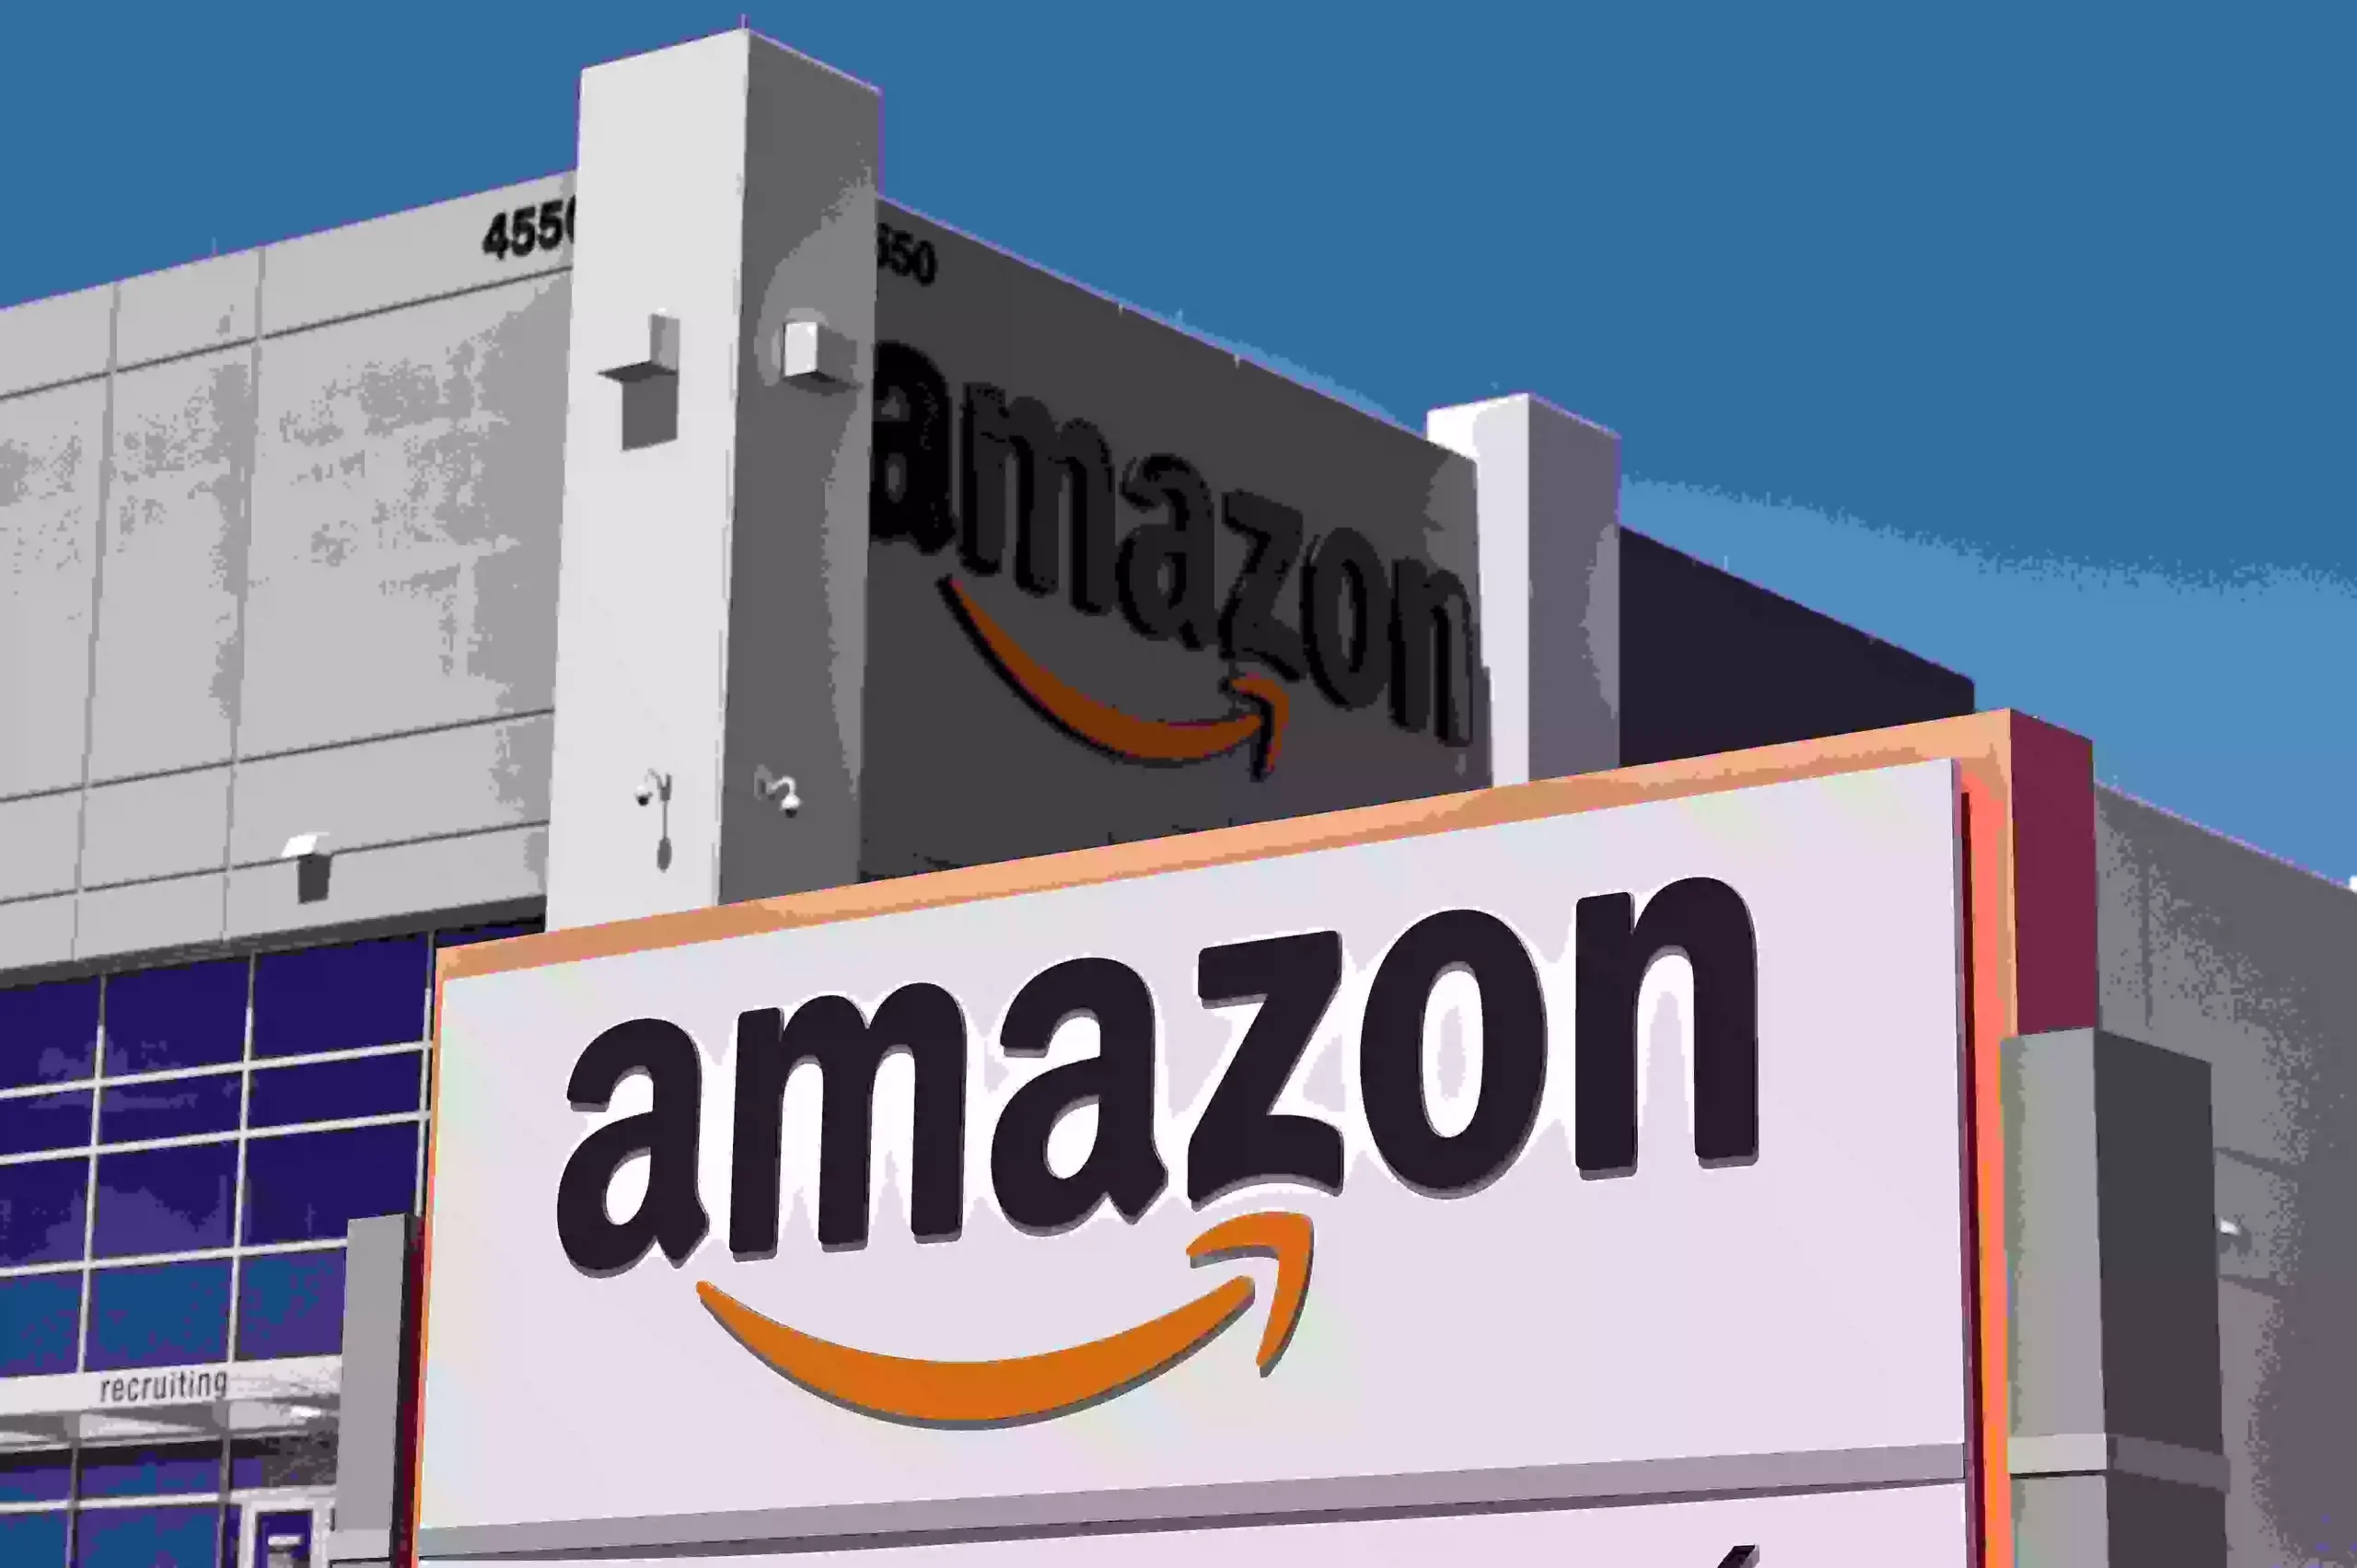 Over The Following Seven Years, Amazon To Invest Extra $15 Billion In India